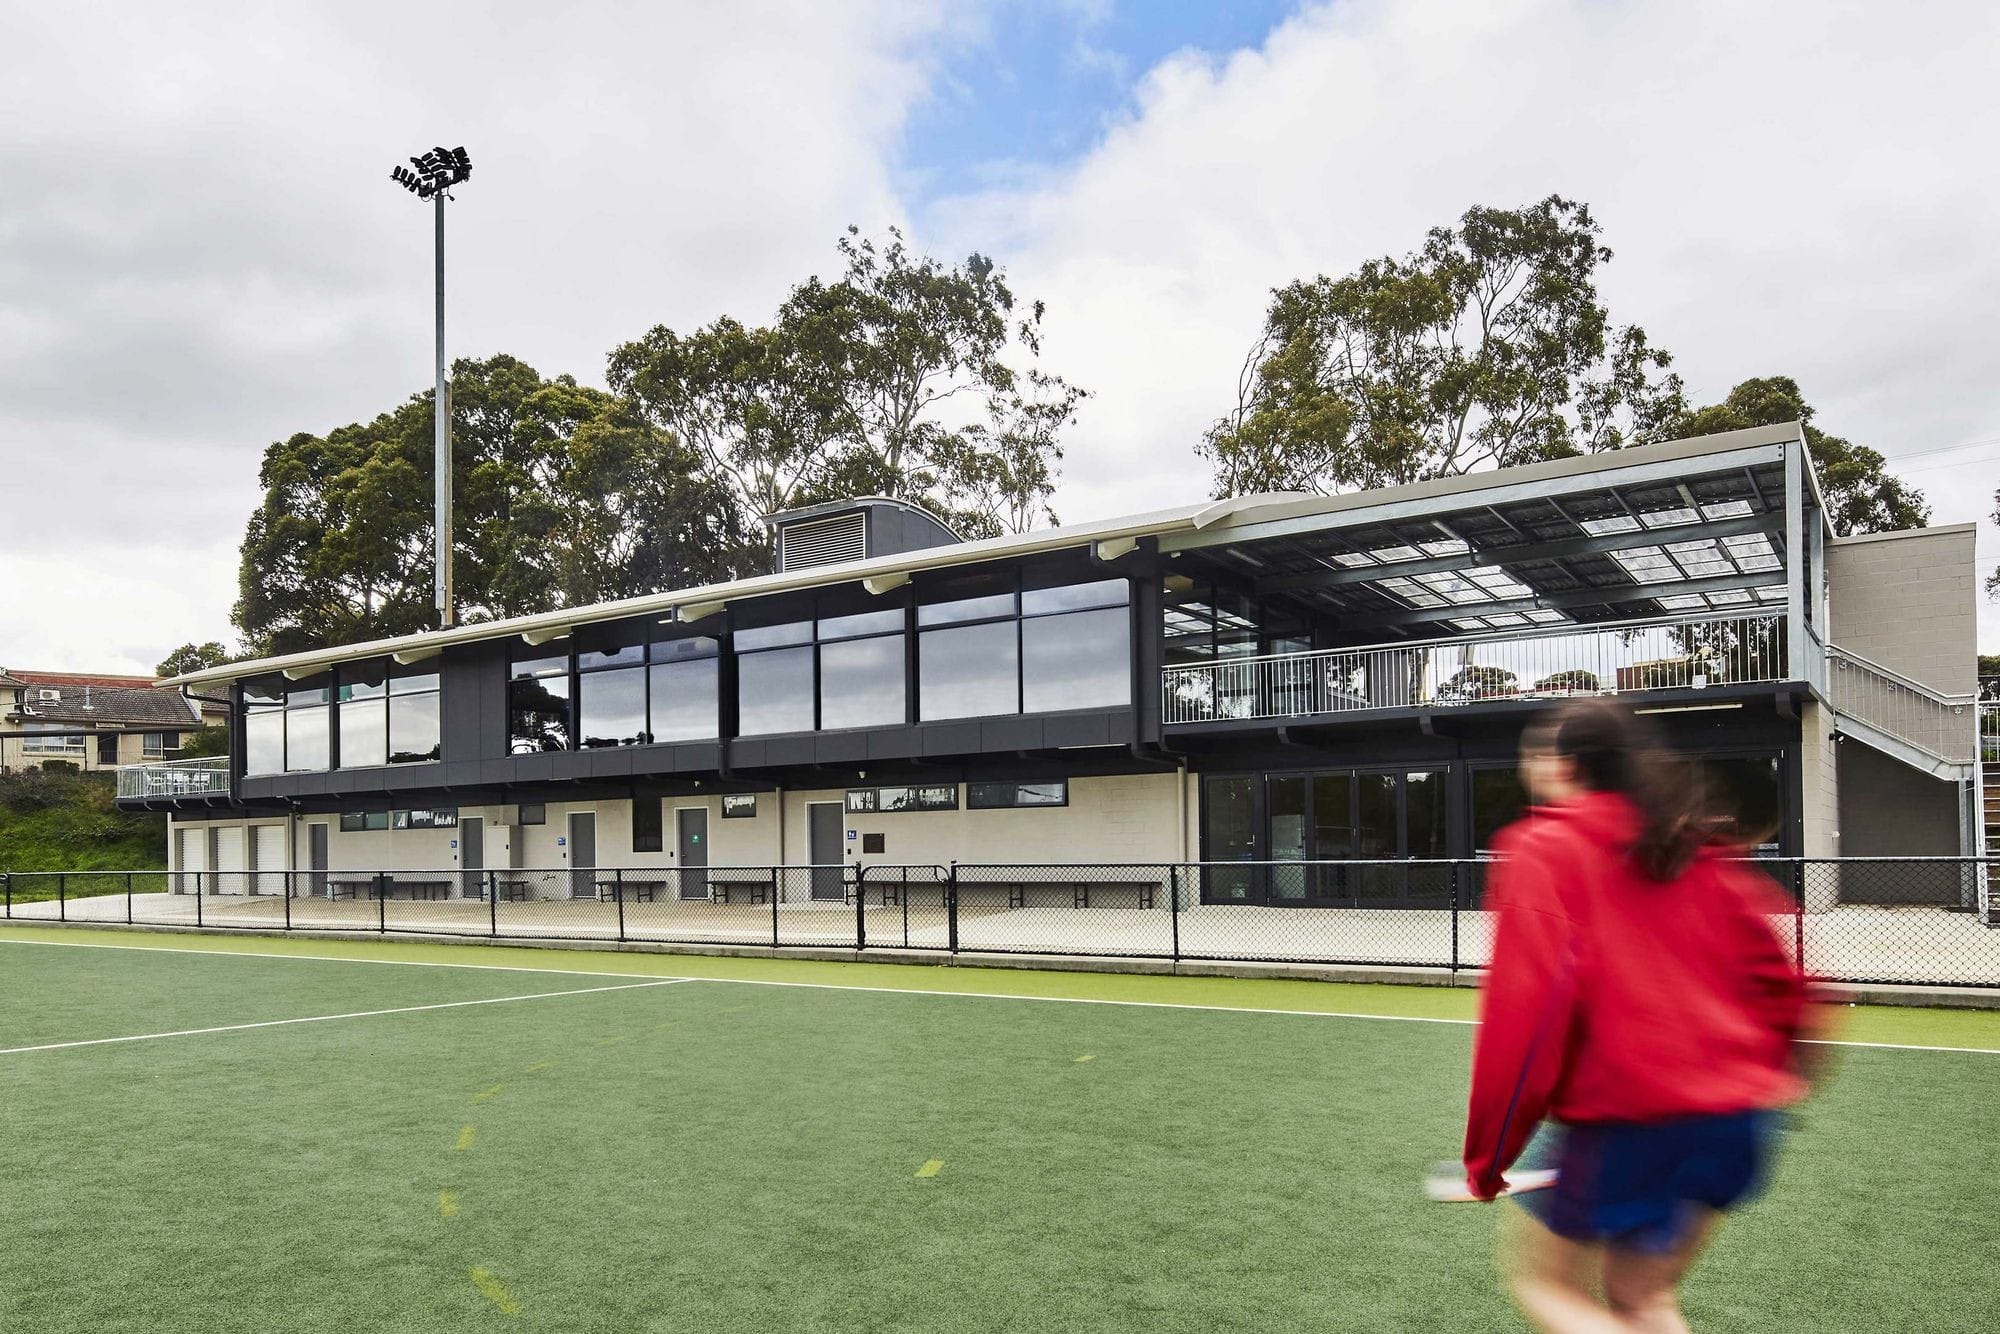 Home to the Hawthorn and Toorak East Malvern Hockey Clubs, the project is a major redevelopment with new clubrooms, kiosk, viewing decks, multipurpose rooms and